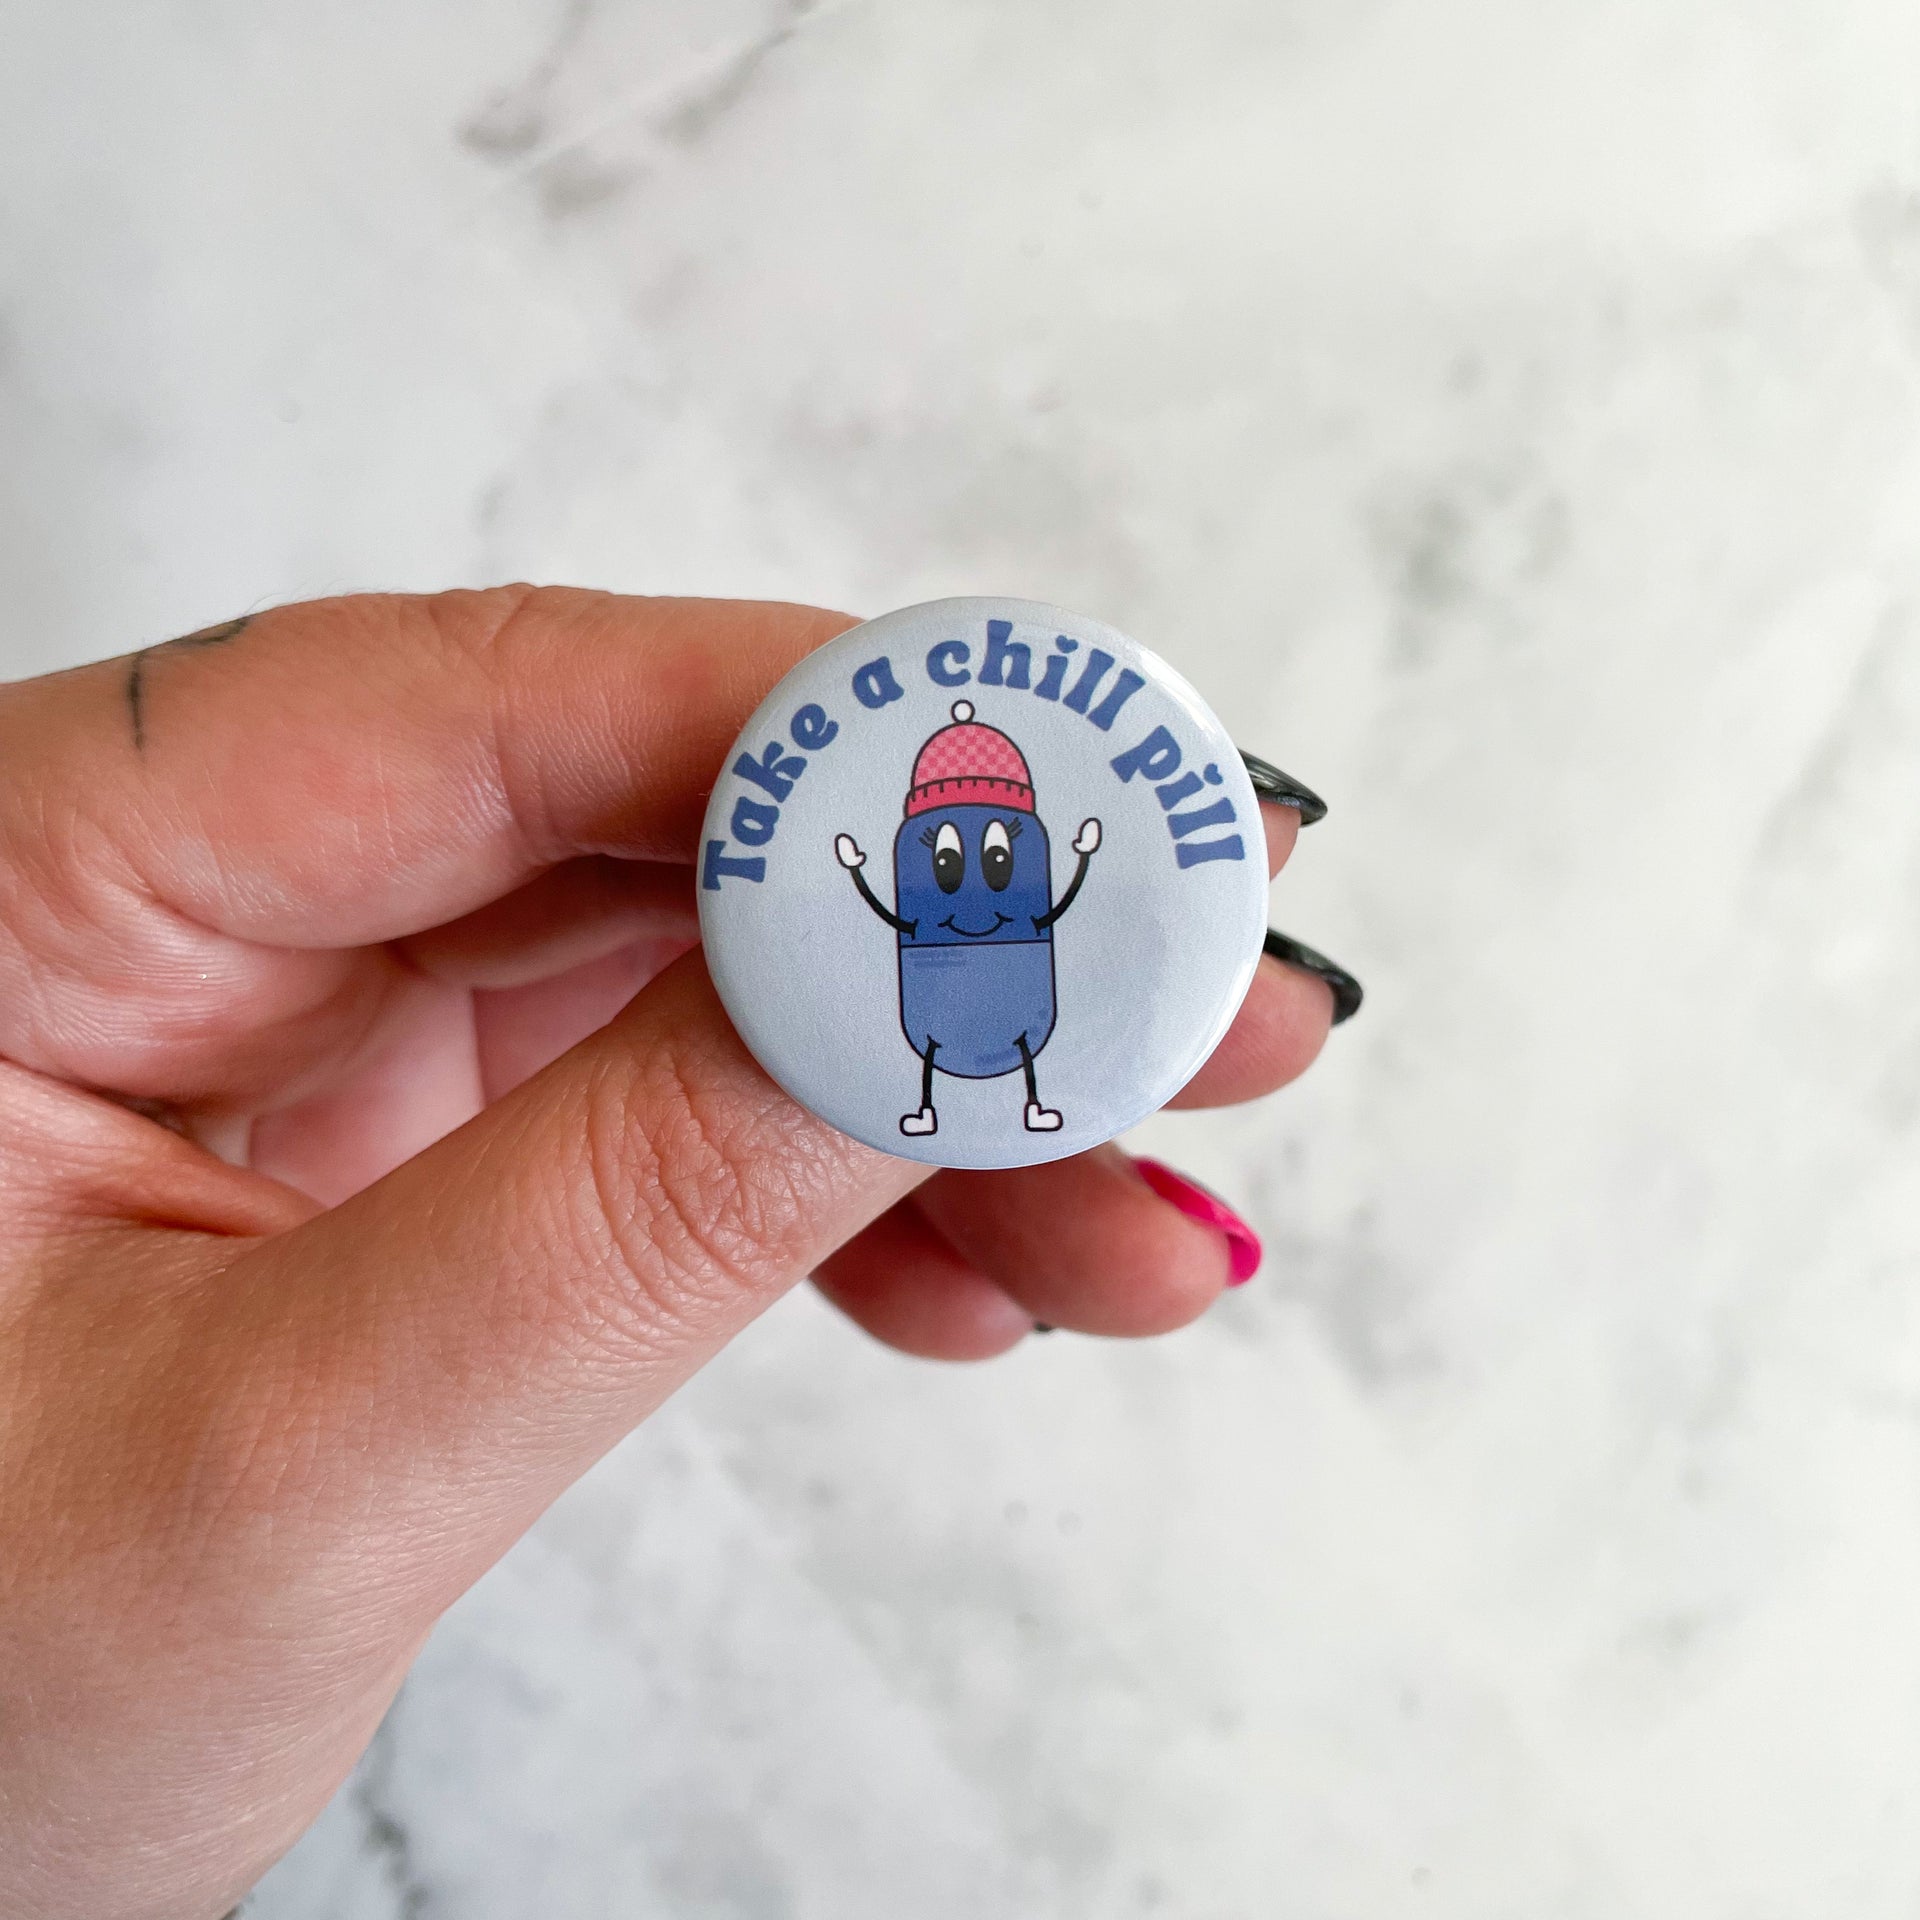 Take A Chill Pill Button / Badge (Buy 4 Get 1 FREE) – Jami Creates